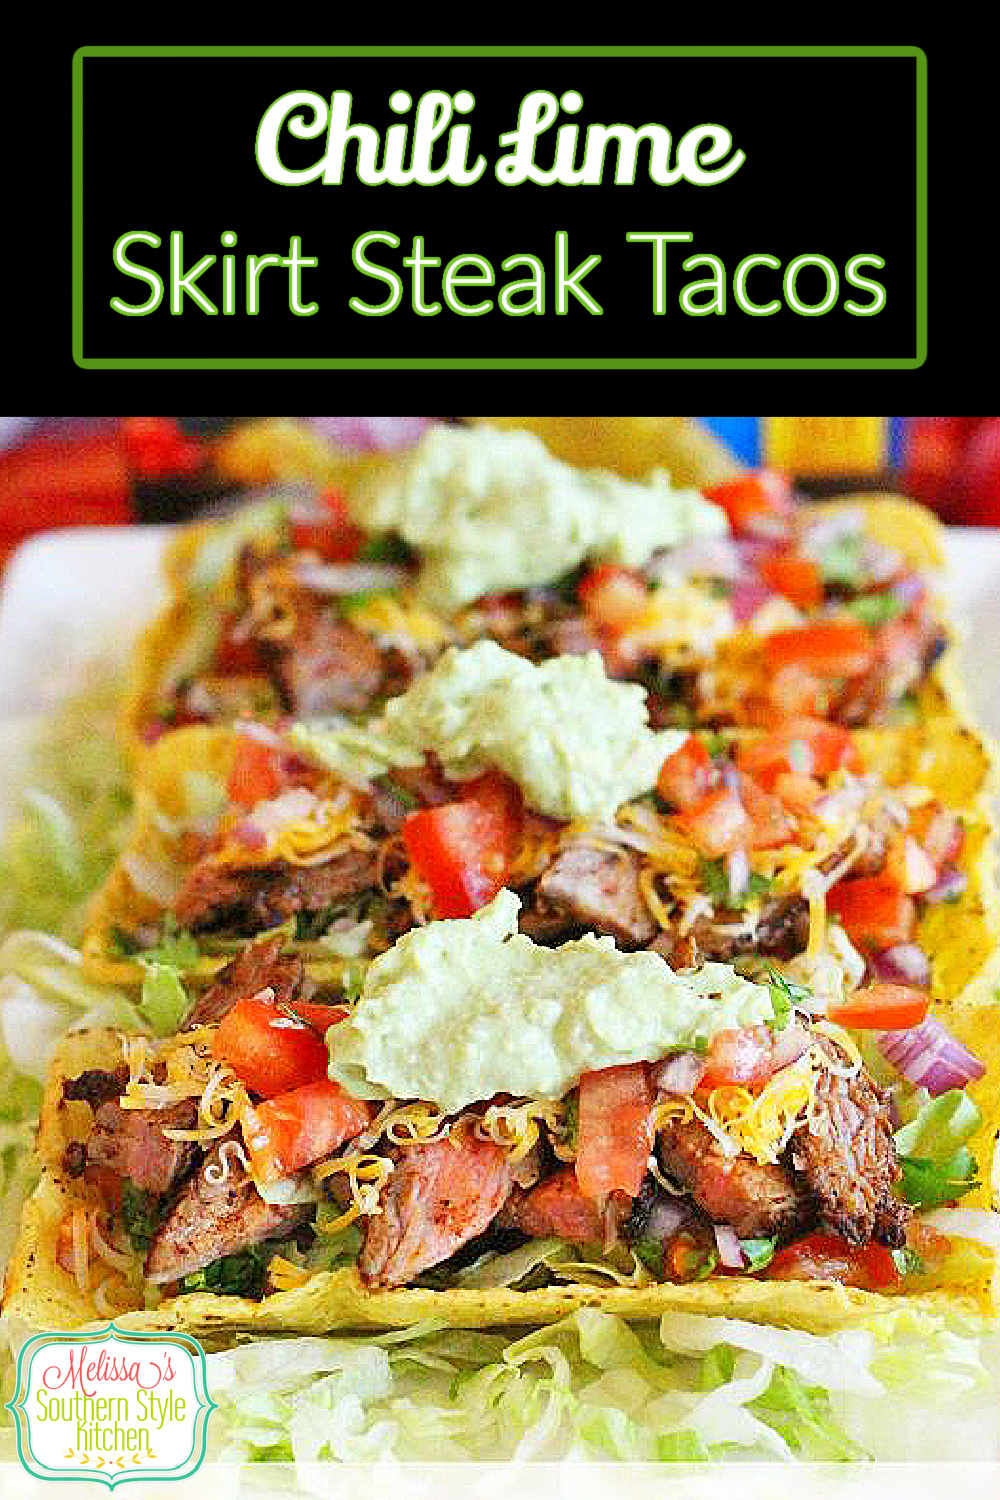 Enjoy these Chili Lime Skirt Steak Tacos with Avocado Cream for a low-stress weekday meal or a laid back weekend homestyle fiesta #skirtsteaktacos #steaktacos #tacorecipes #skirtsteak #steakrecipes #tacotuesday via @melissasssk